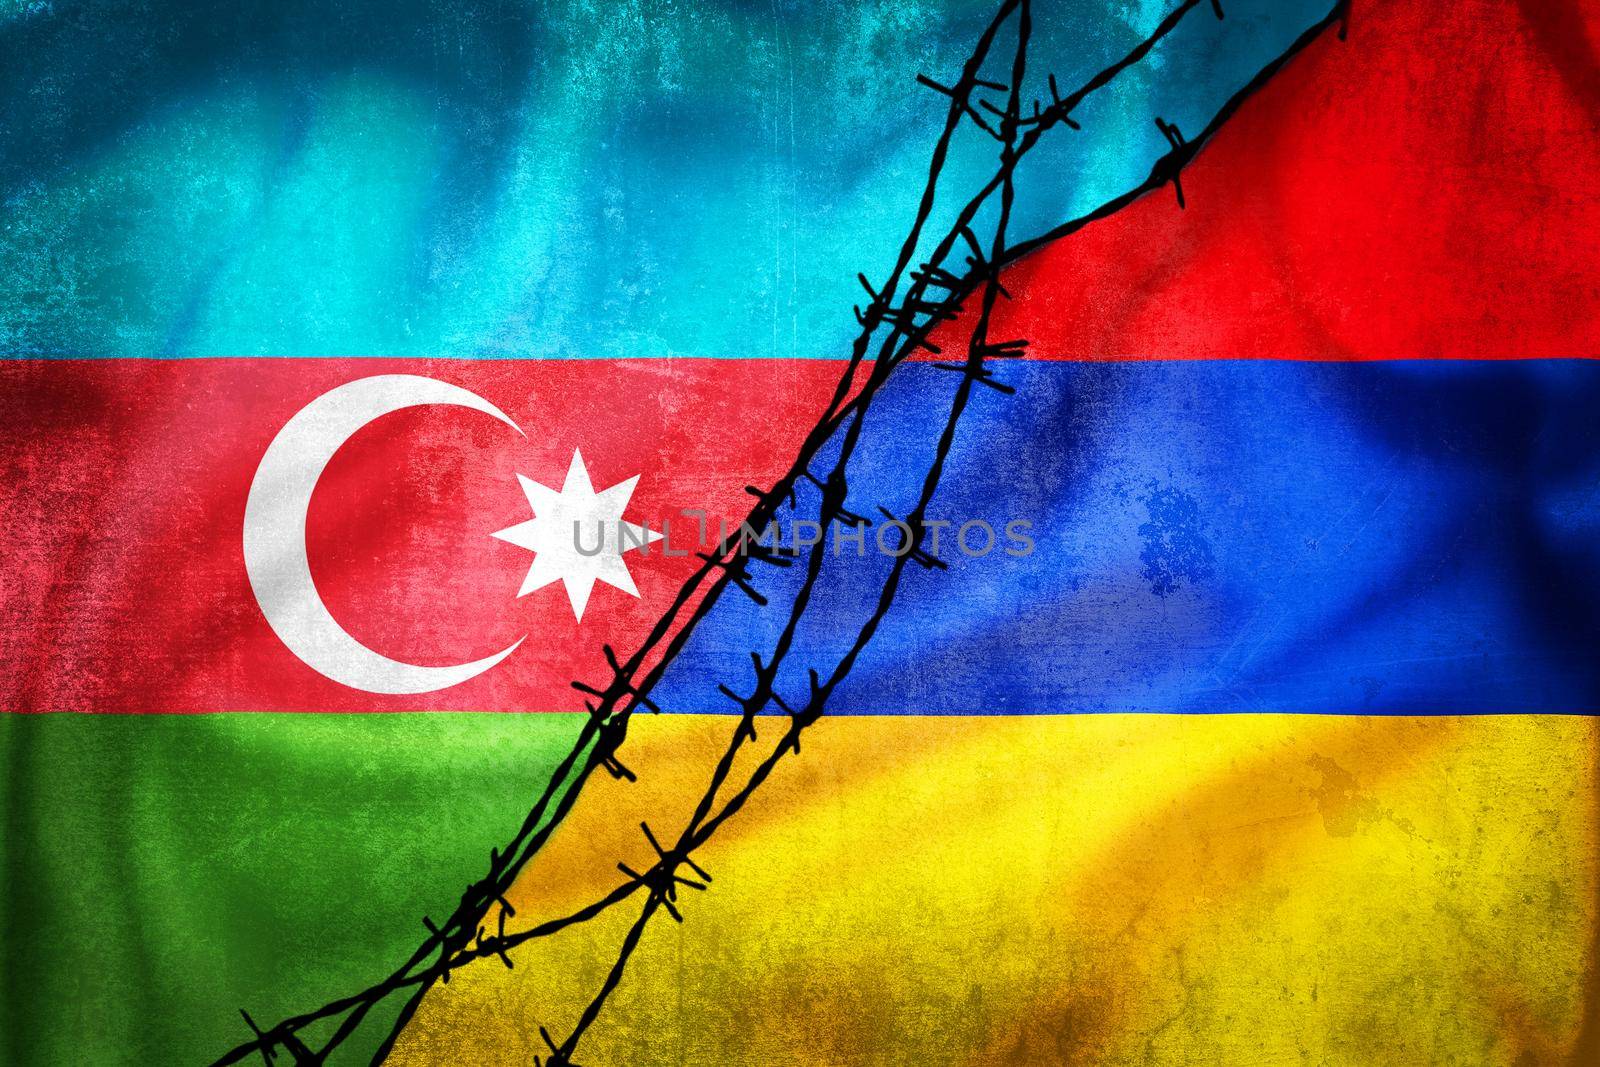 Grunge flags of Azerbaijan and Armenia divided by barb wire illustration by xbrchx